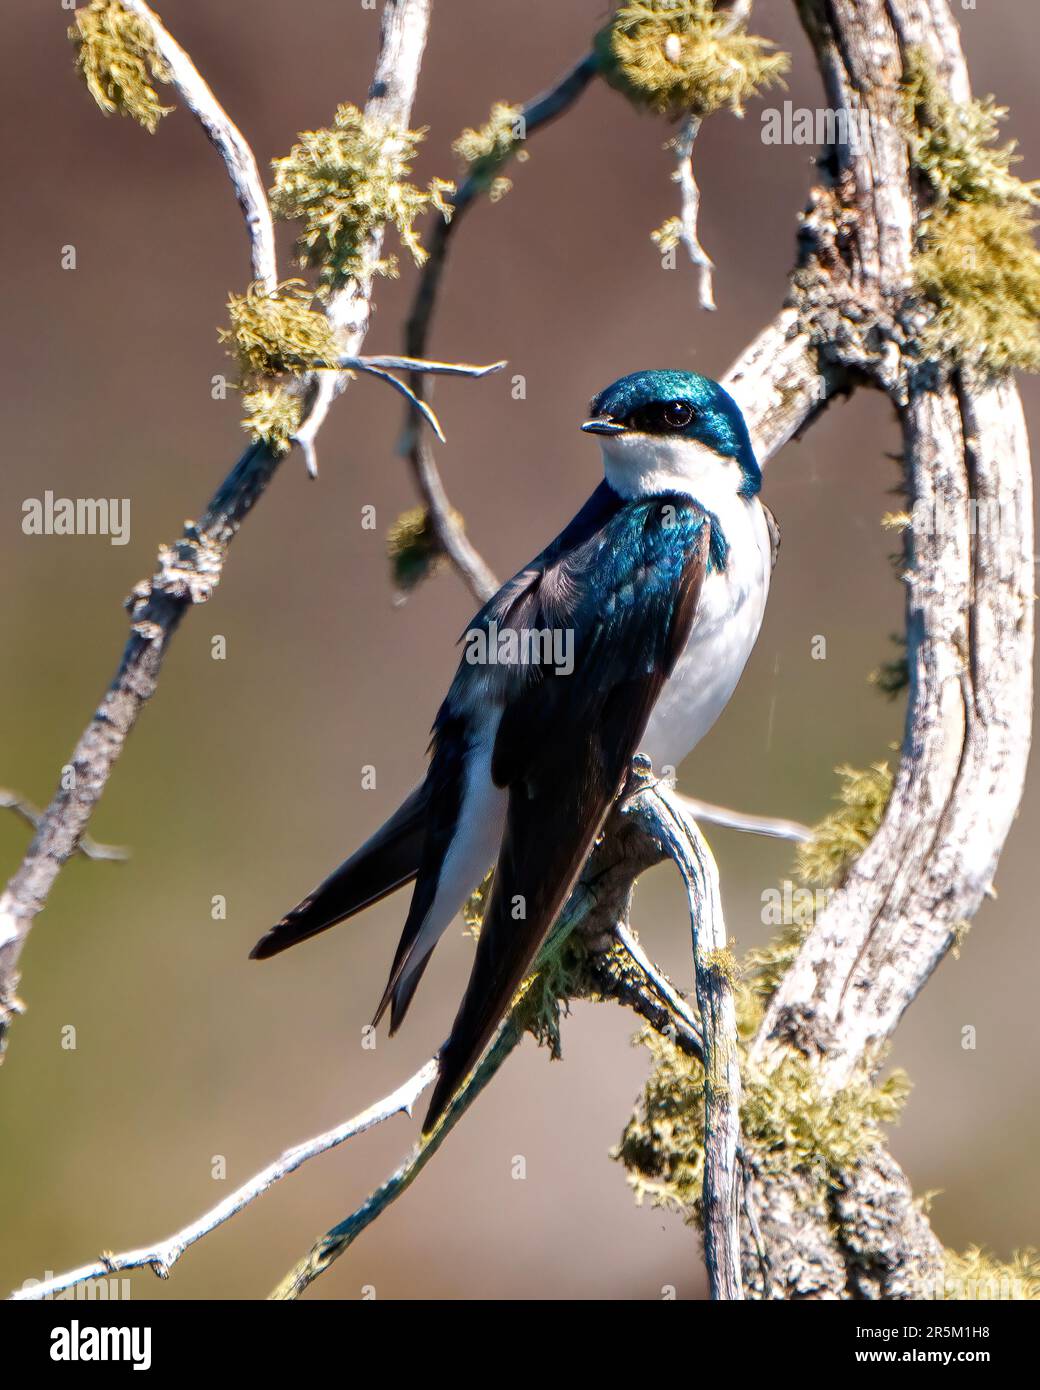 Swallow close-up side view perched on a moss branch with brown background in its environment and habitat surrounding. Stock Photo